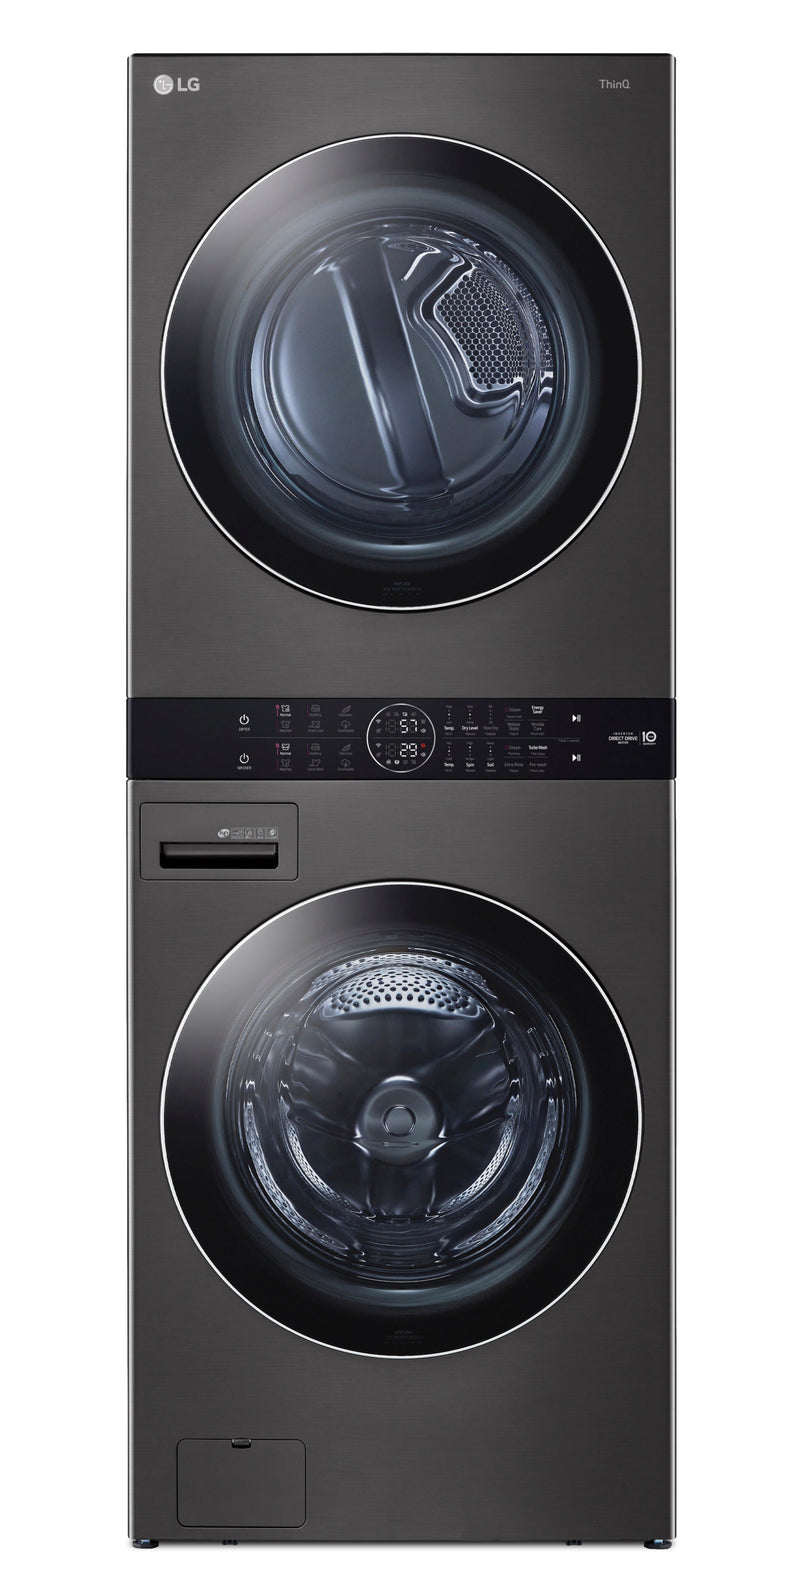 LG WashTower™ with 5.2 Cu. Ft. Washer and 7.4 Cu. Ft. Dryer - WKEX200HBA 